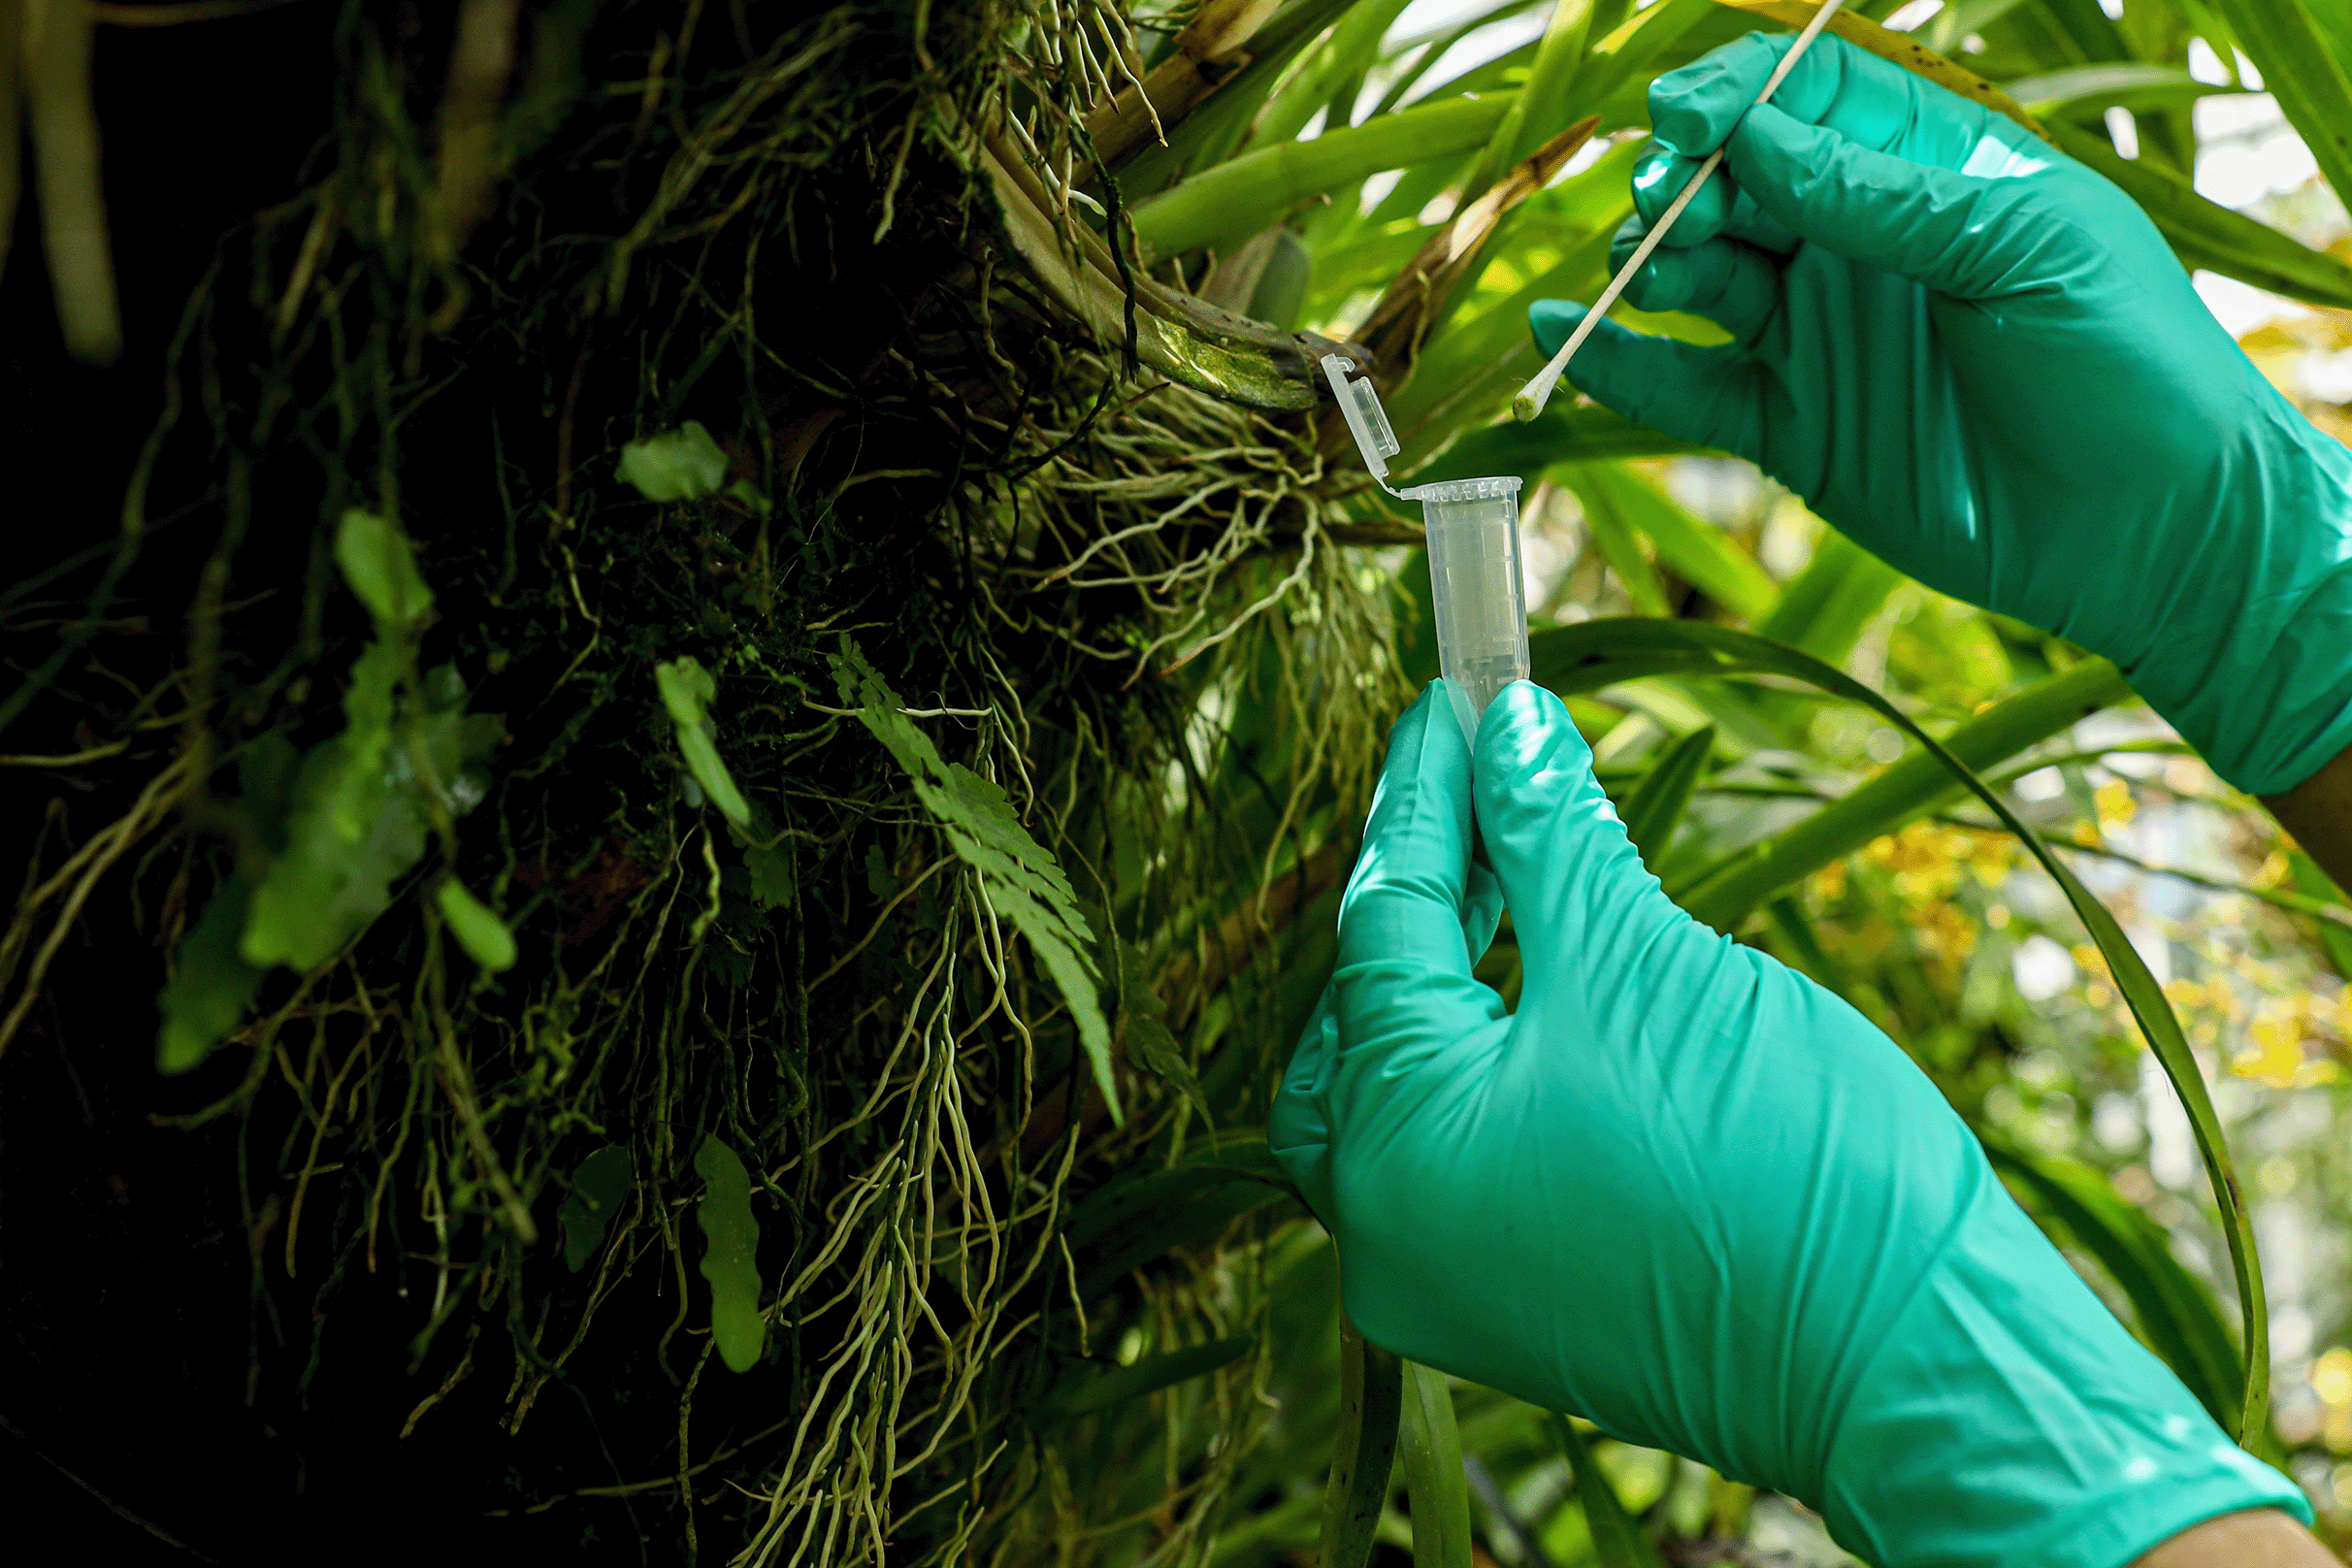 Swabbing a leaf to collect vertebrate eDNA in the Greifswald Botanical Garden.